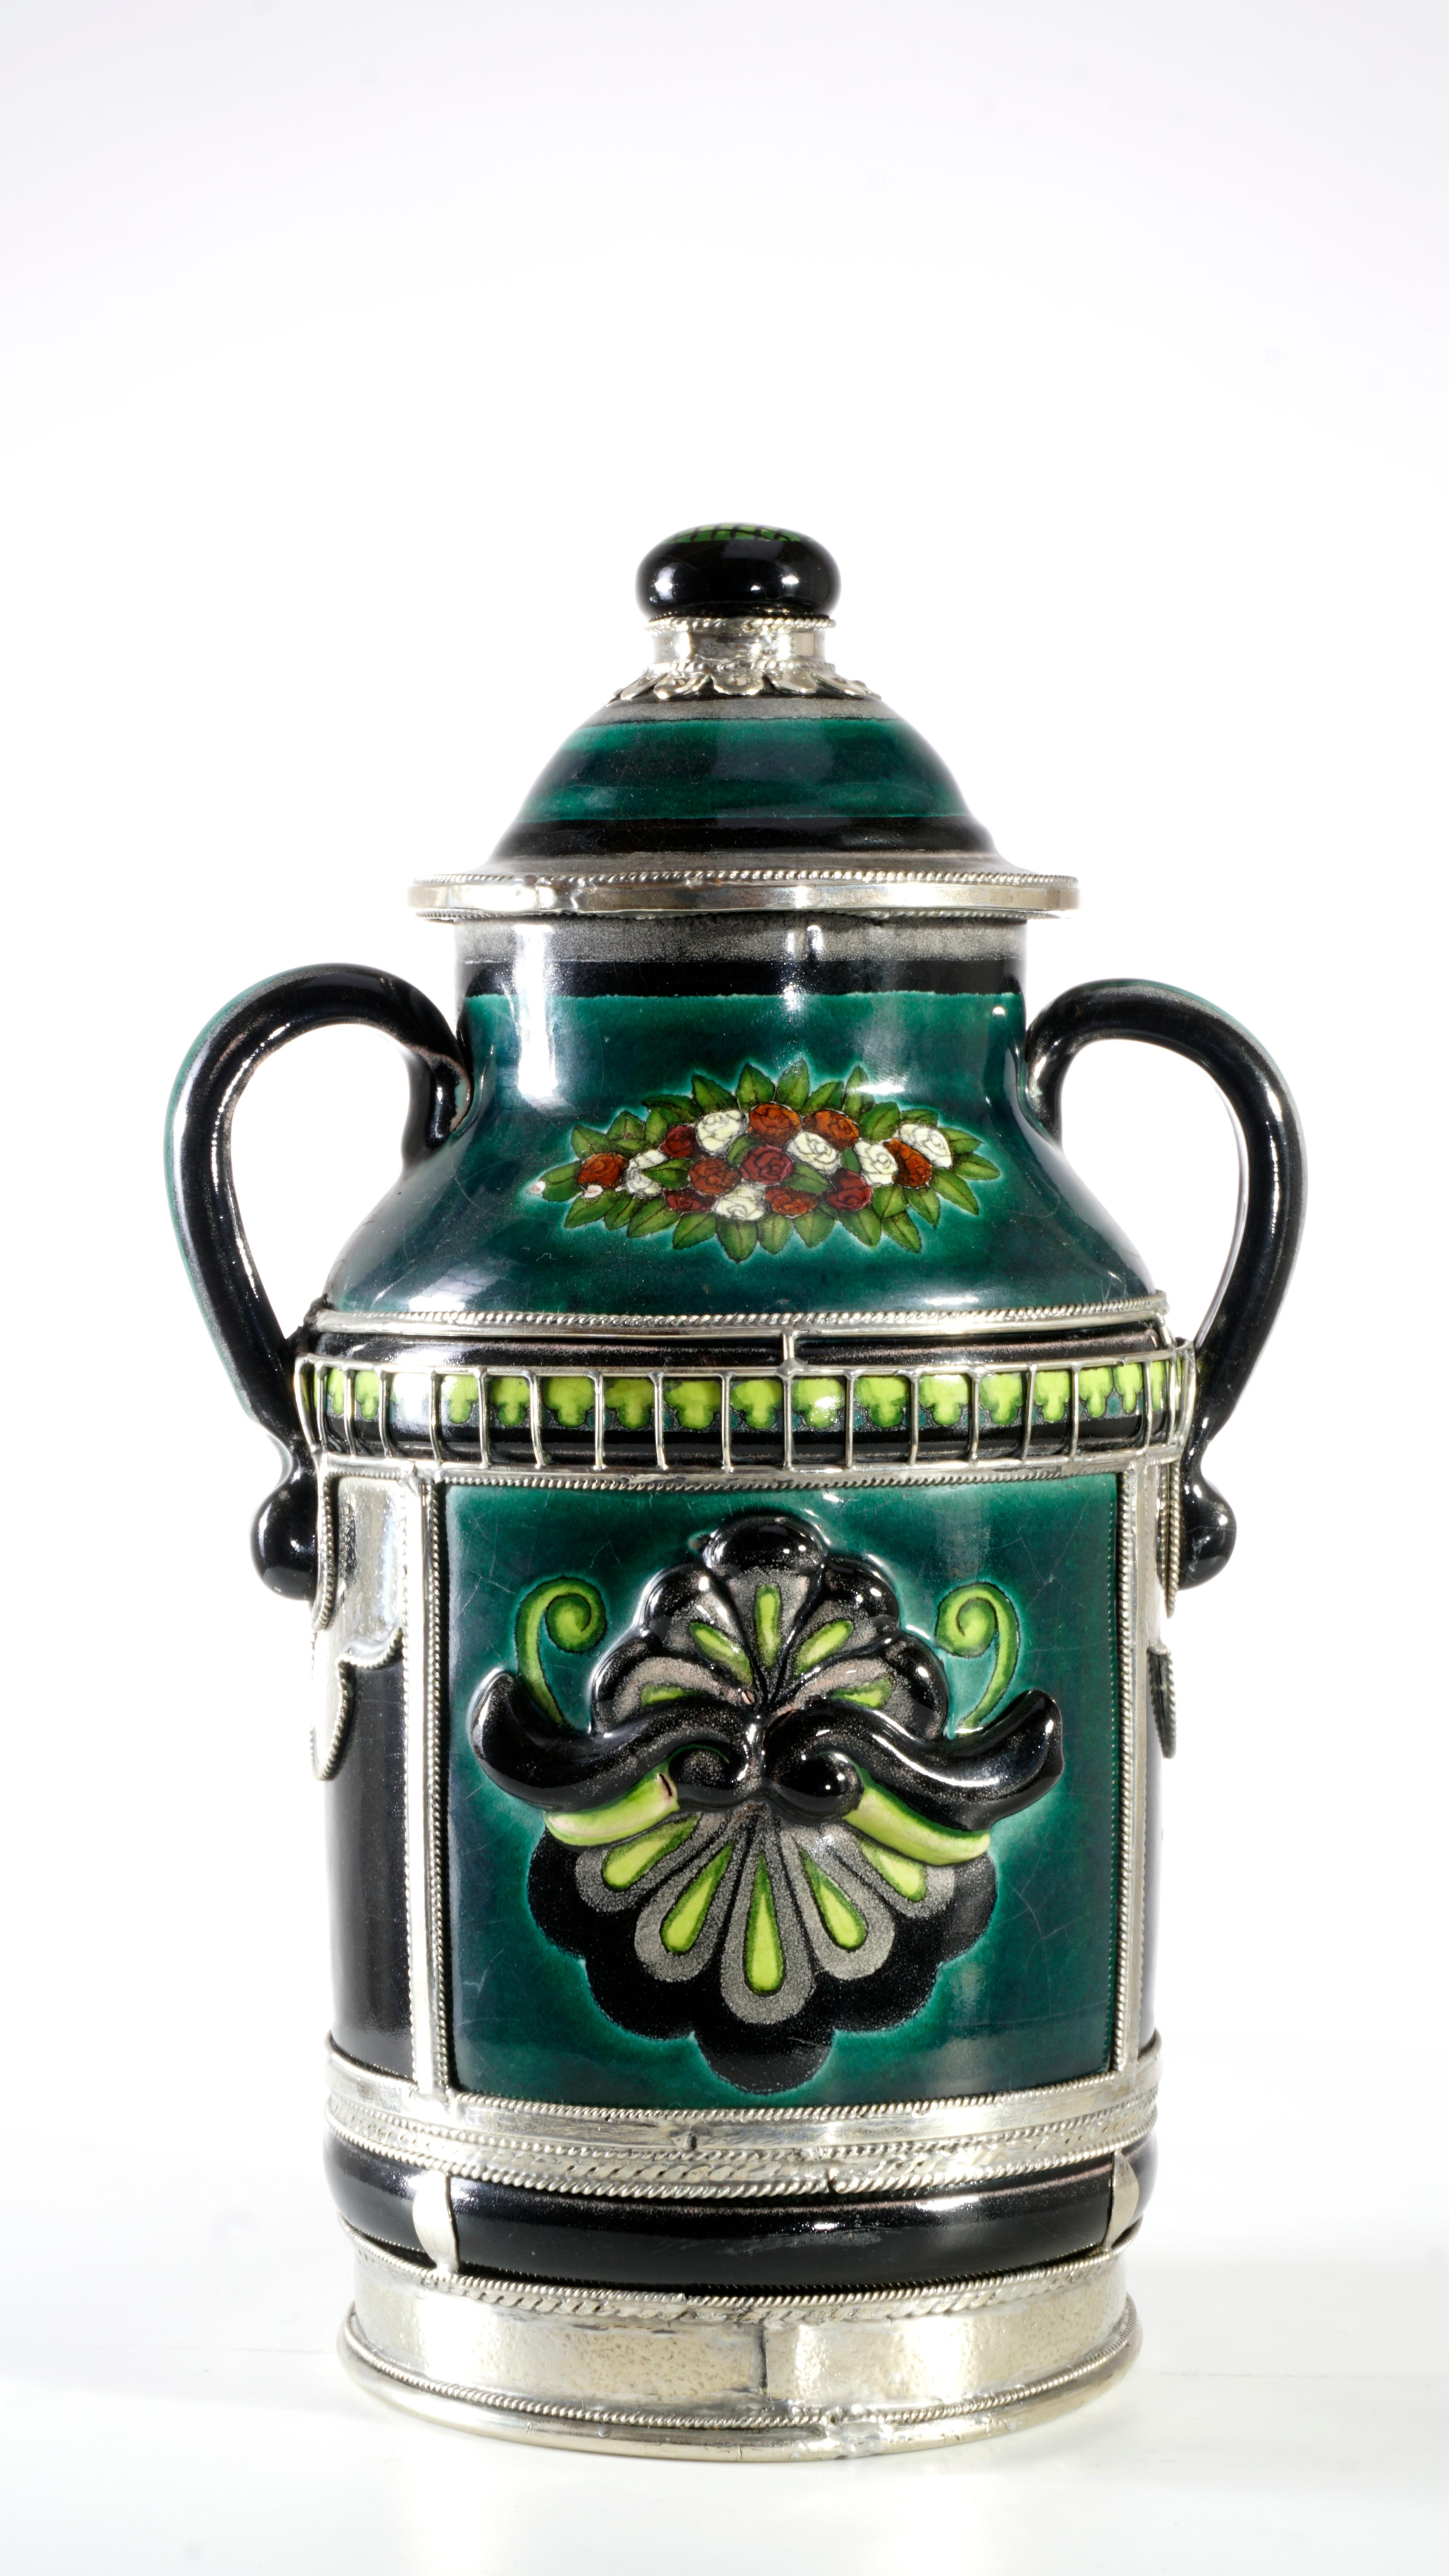 Always unique pieces is what you are going to hear about Jesus Guerrero Santo's work, all the pieces are handmade and created one by one it takes months to produce each peace.
This ceramica and white metal (alpaca) Pharmacy jar, was created in